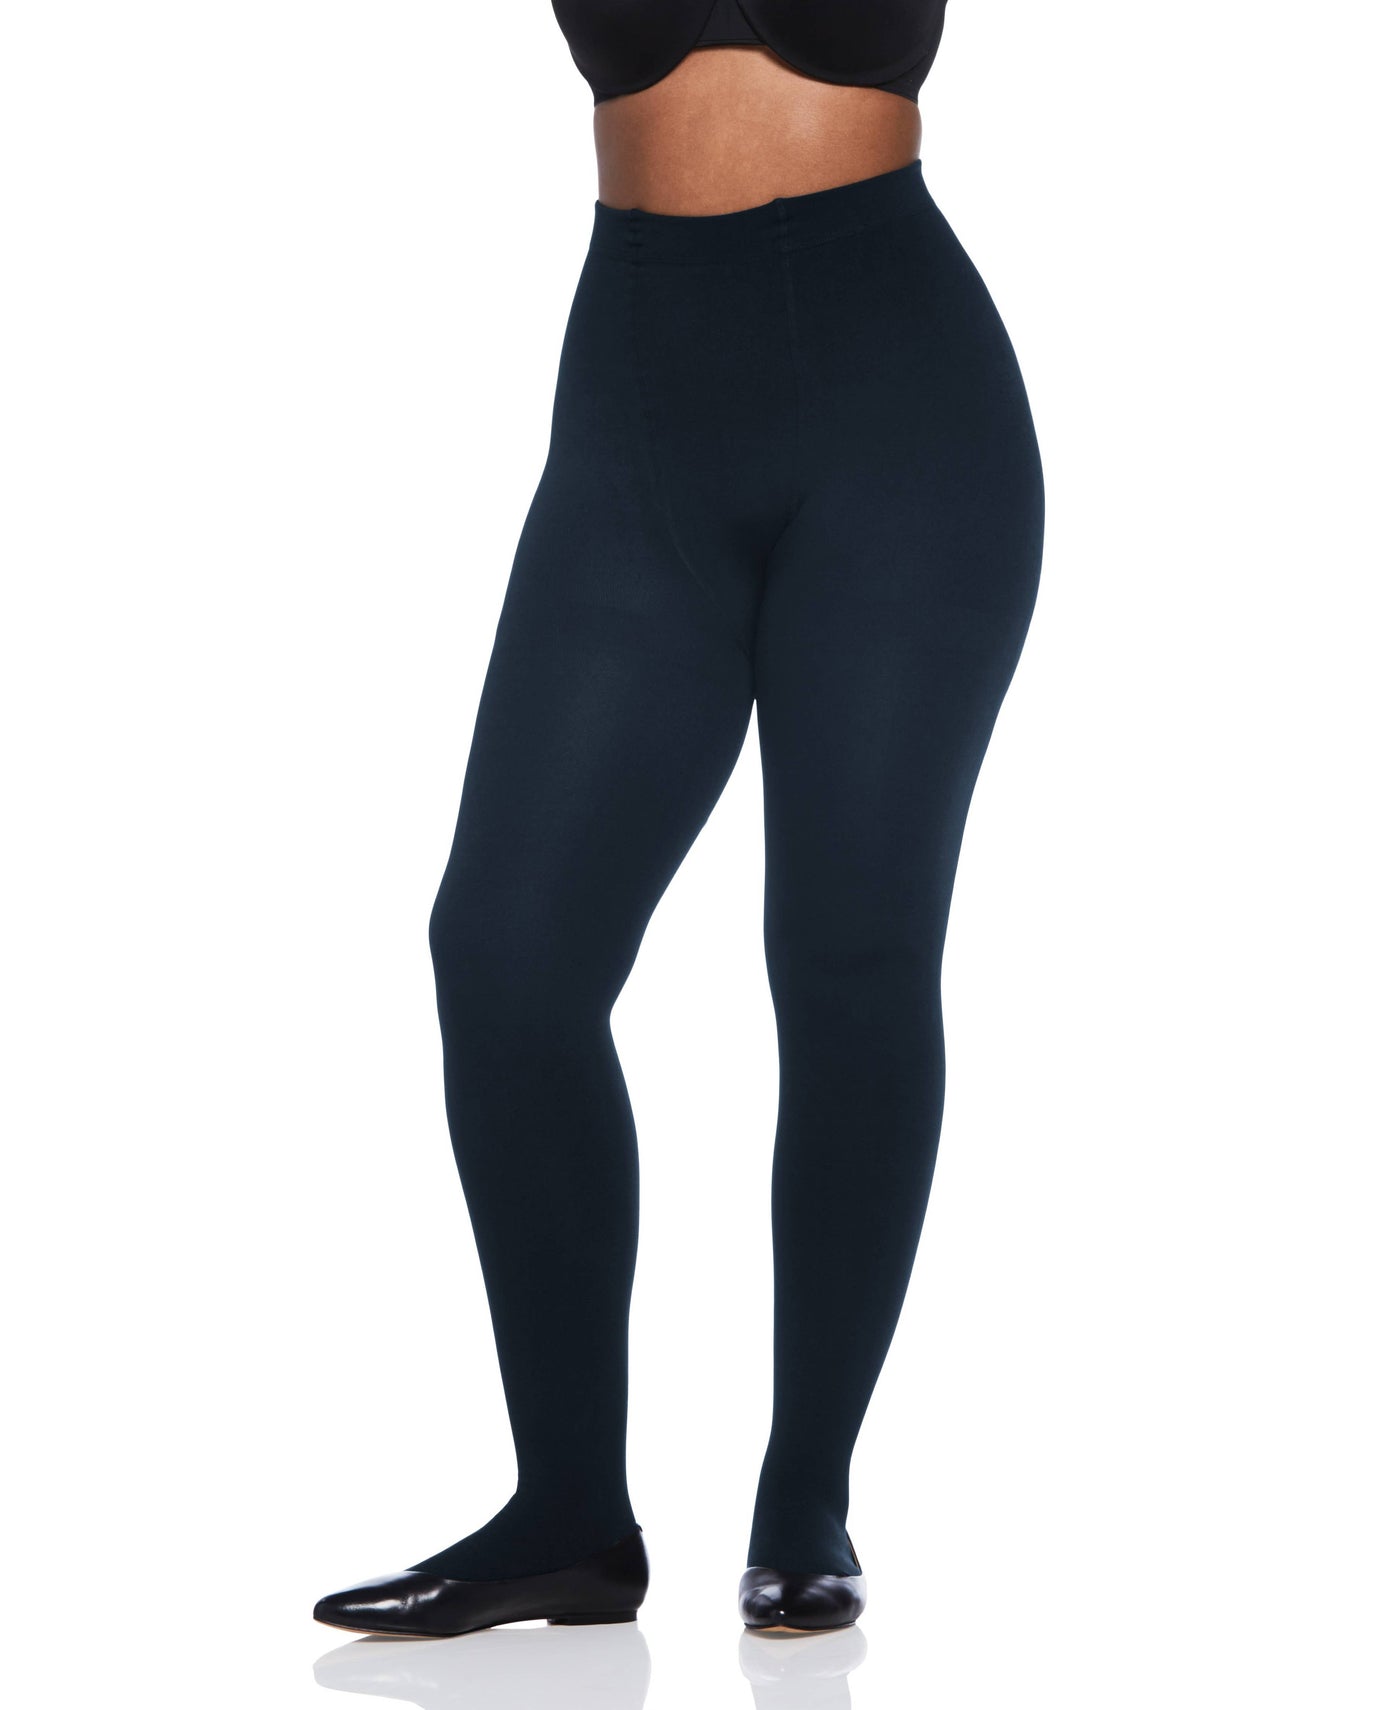 The Easy On! Thermal Plush Lined Tights